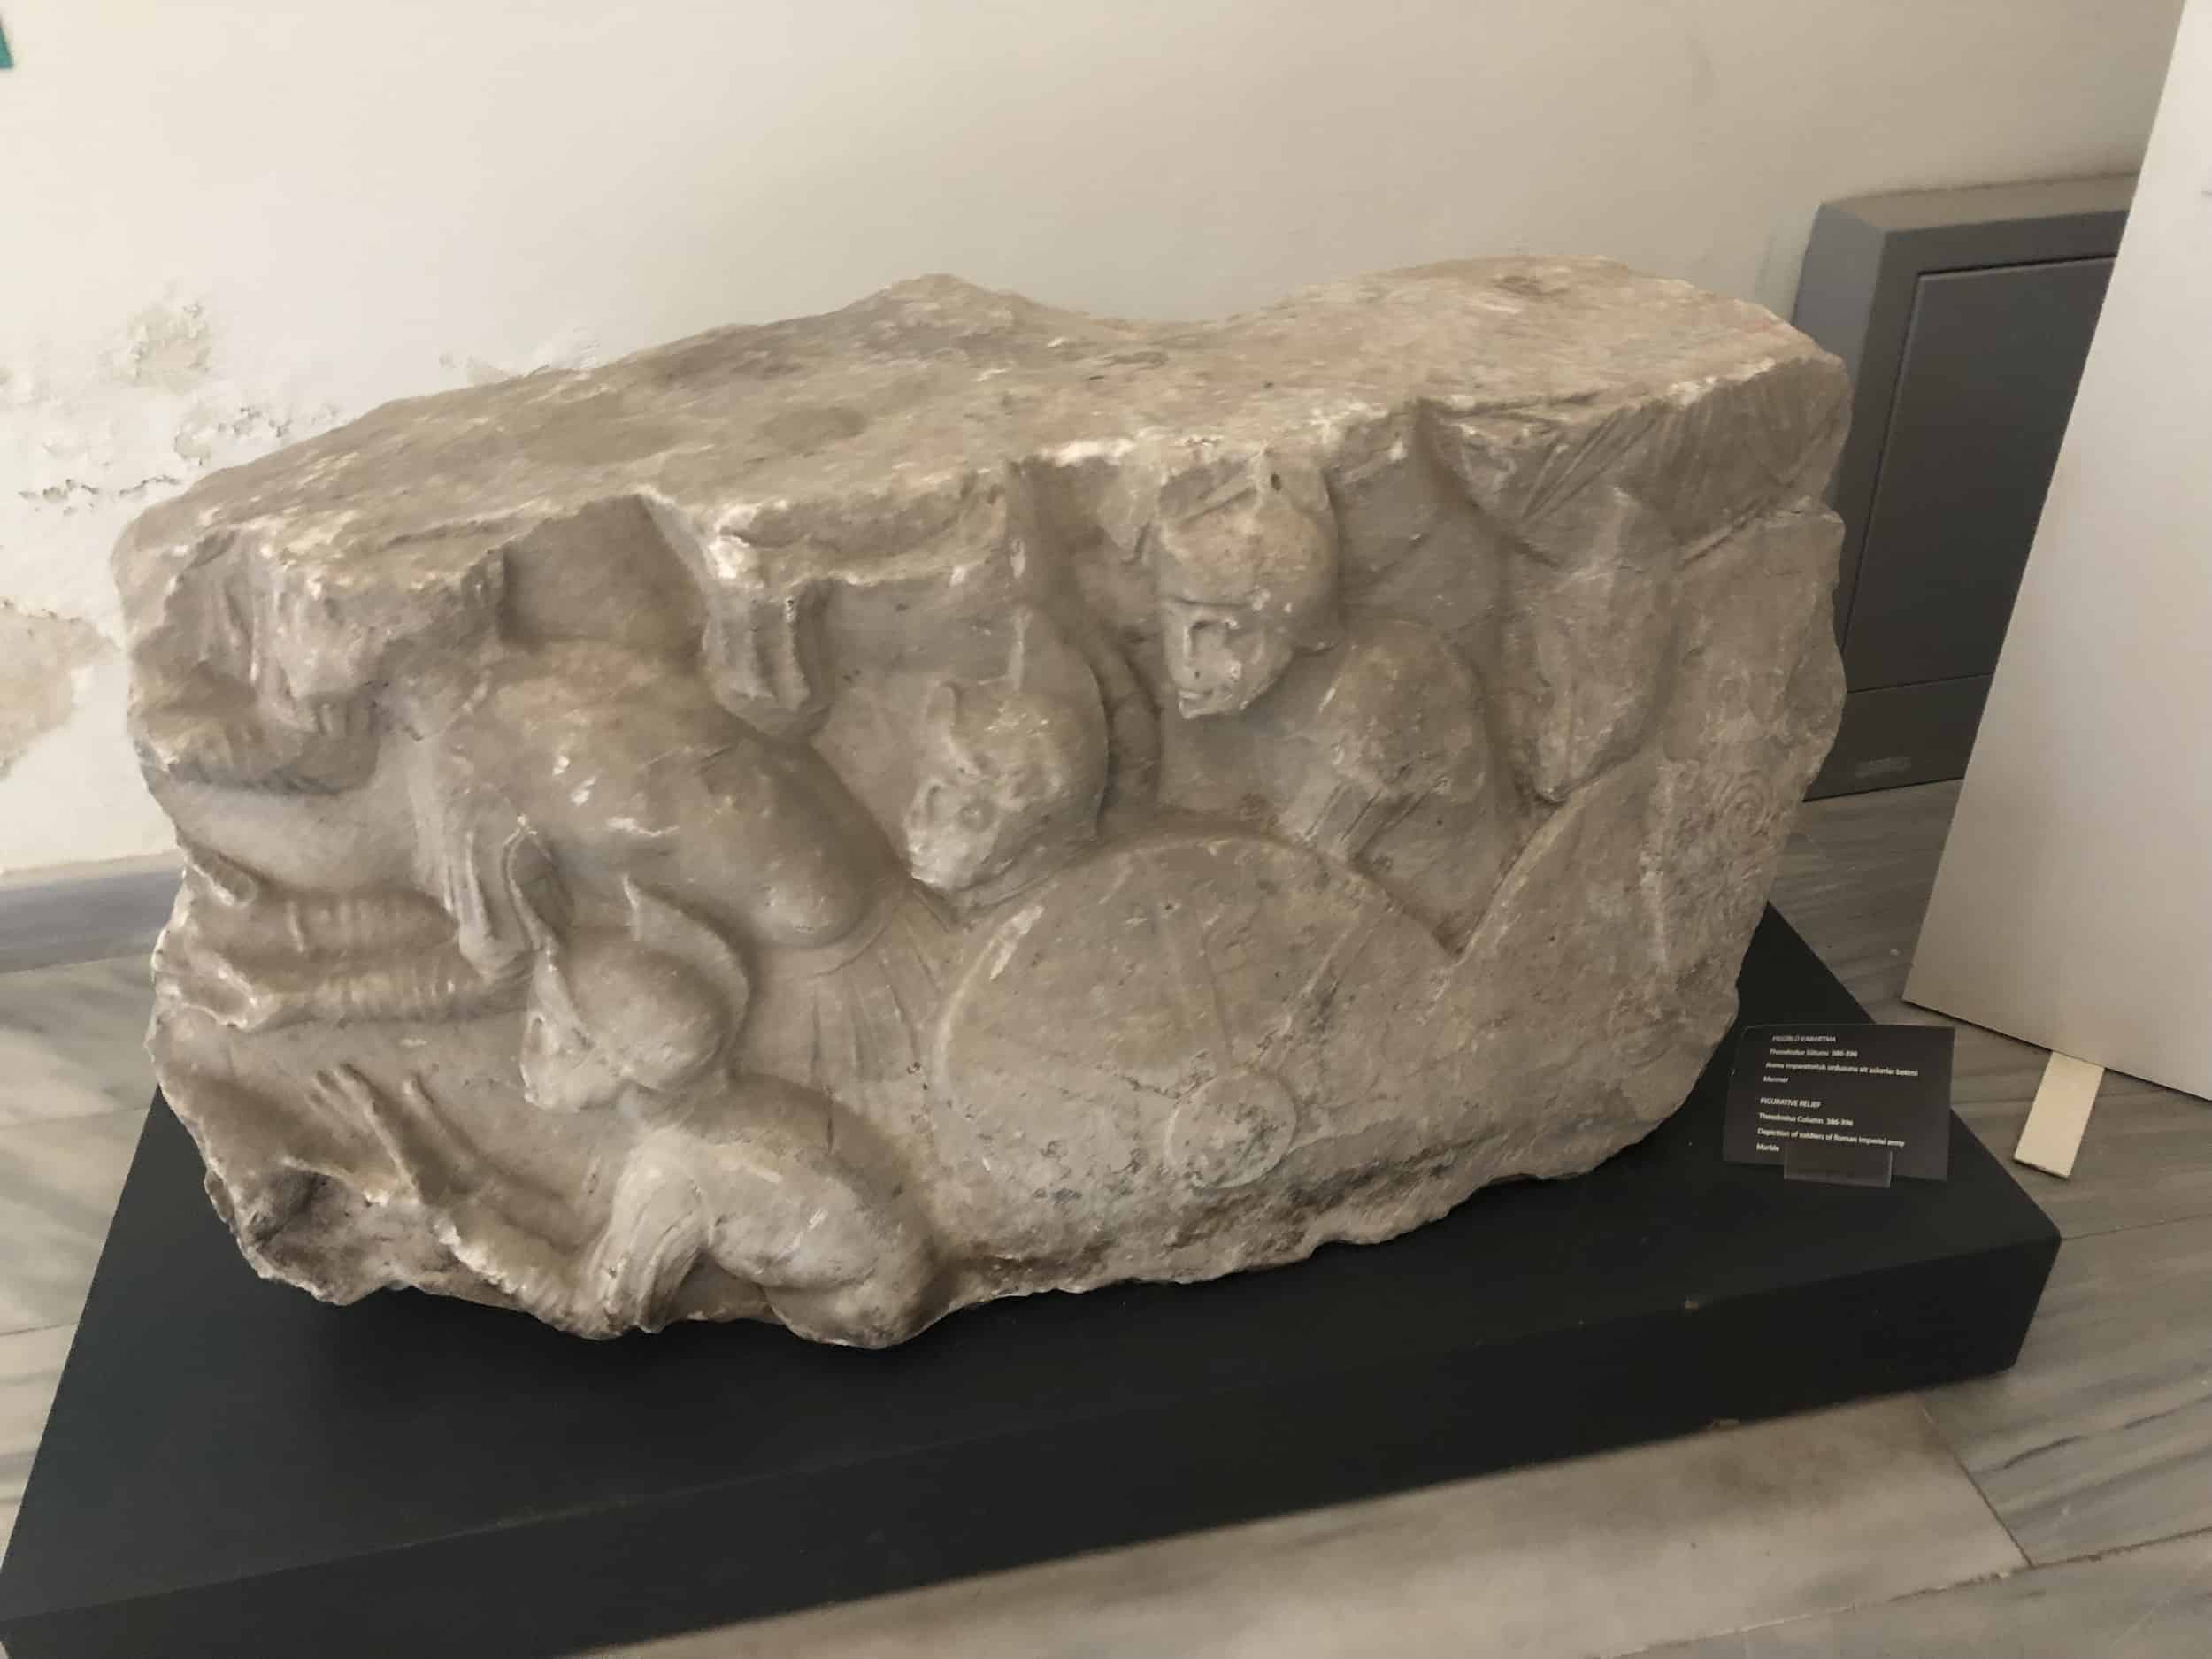 Fragment from the triumphal arch of the Forum of Theodosius at the Bayezid II Hamam (Bayezid II Turkish Bath Cultural Museum) in Beyazıt, Istanbul, Turkey